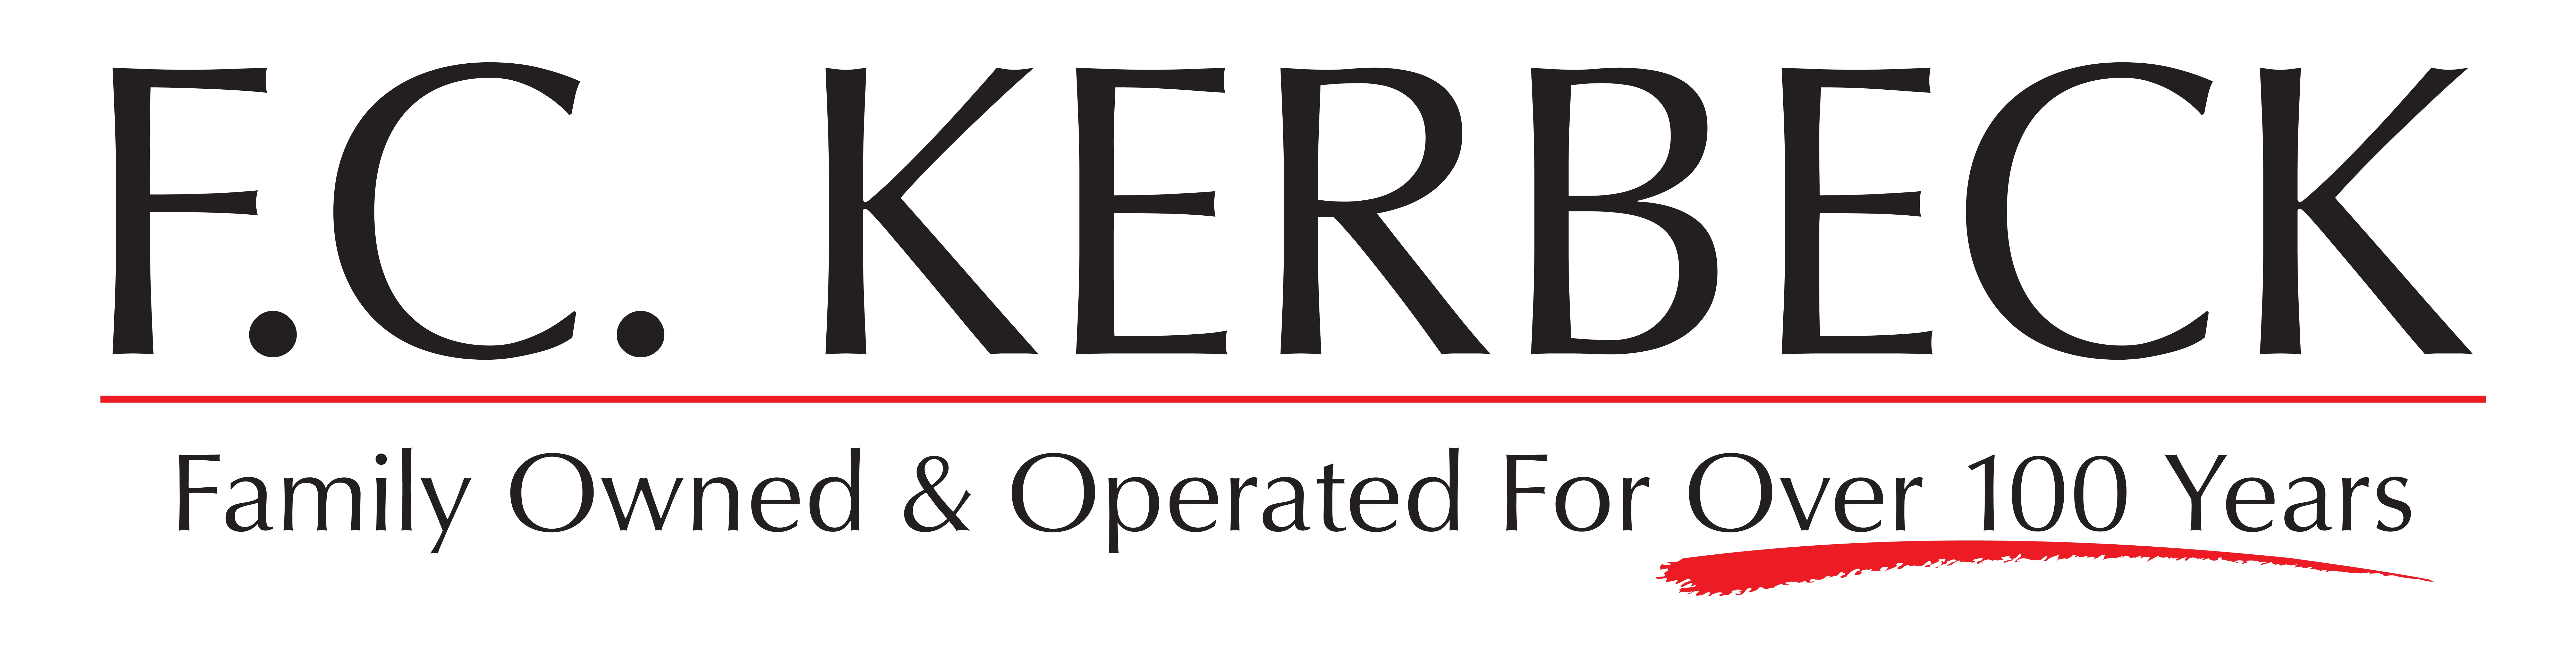 F.C. Kerbeck: Family owned and operated for 100 years!